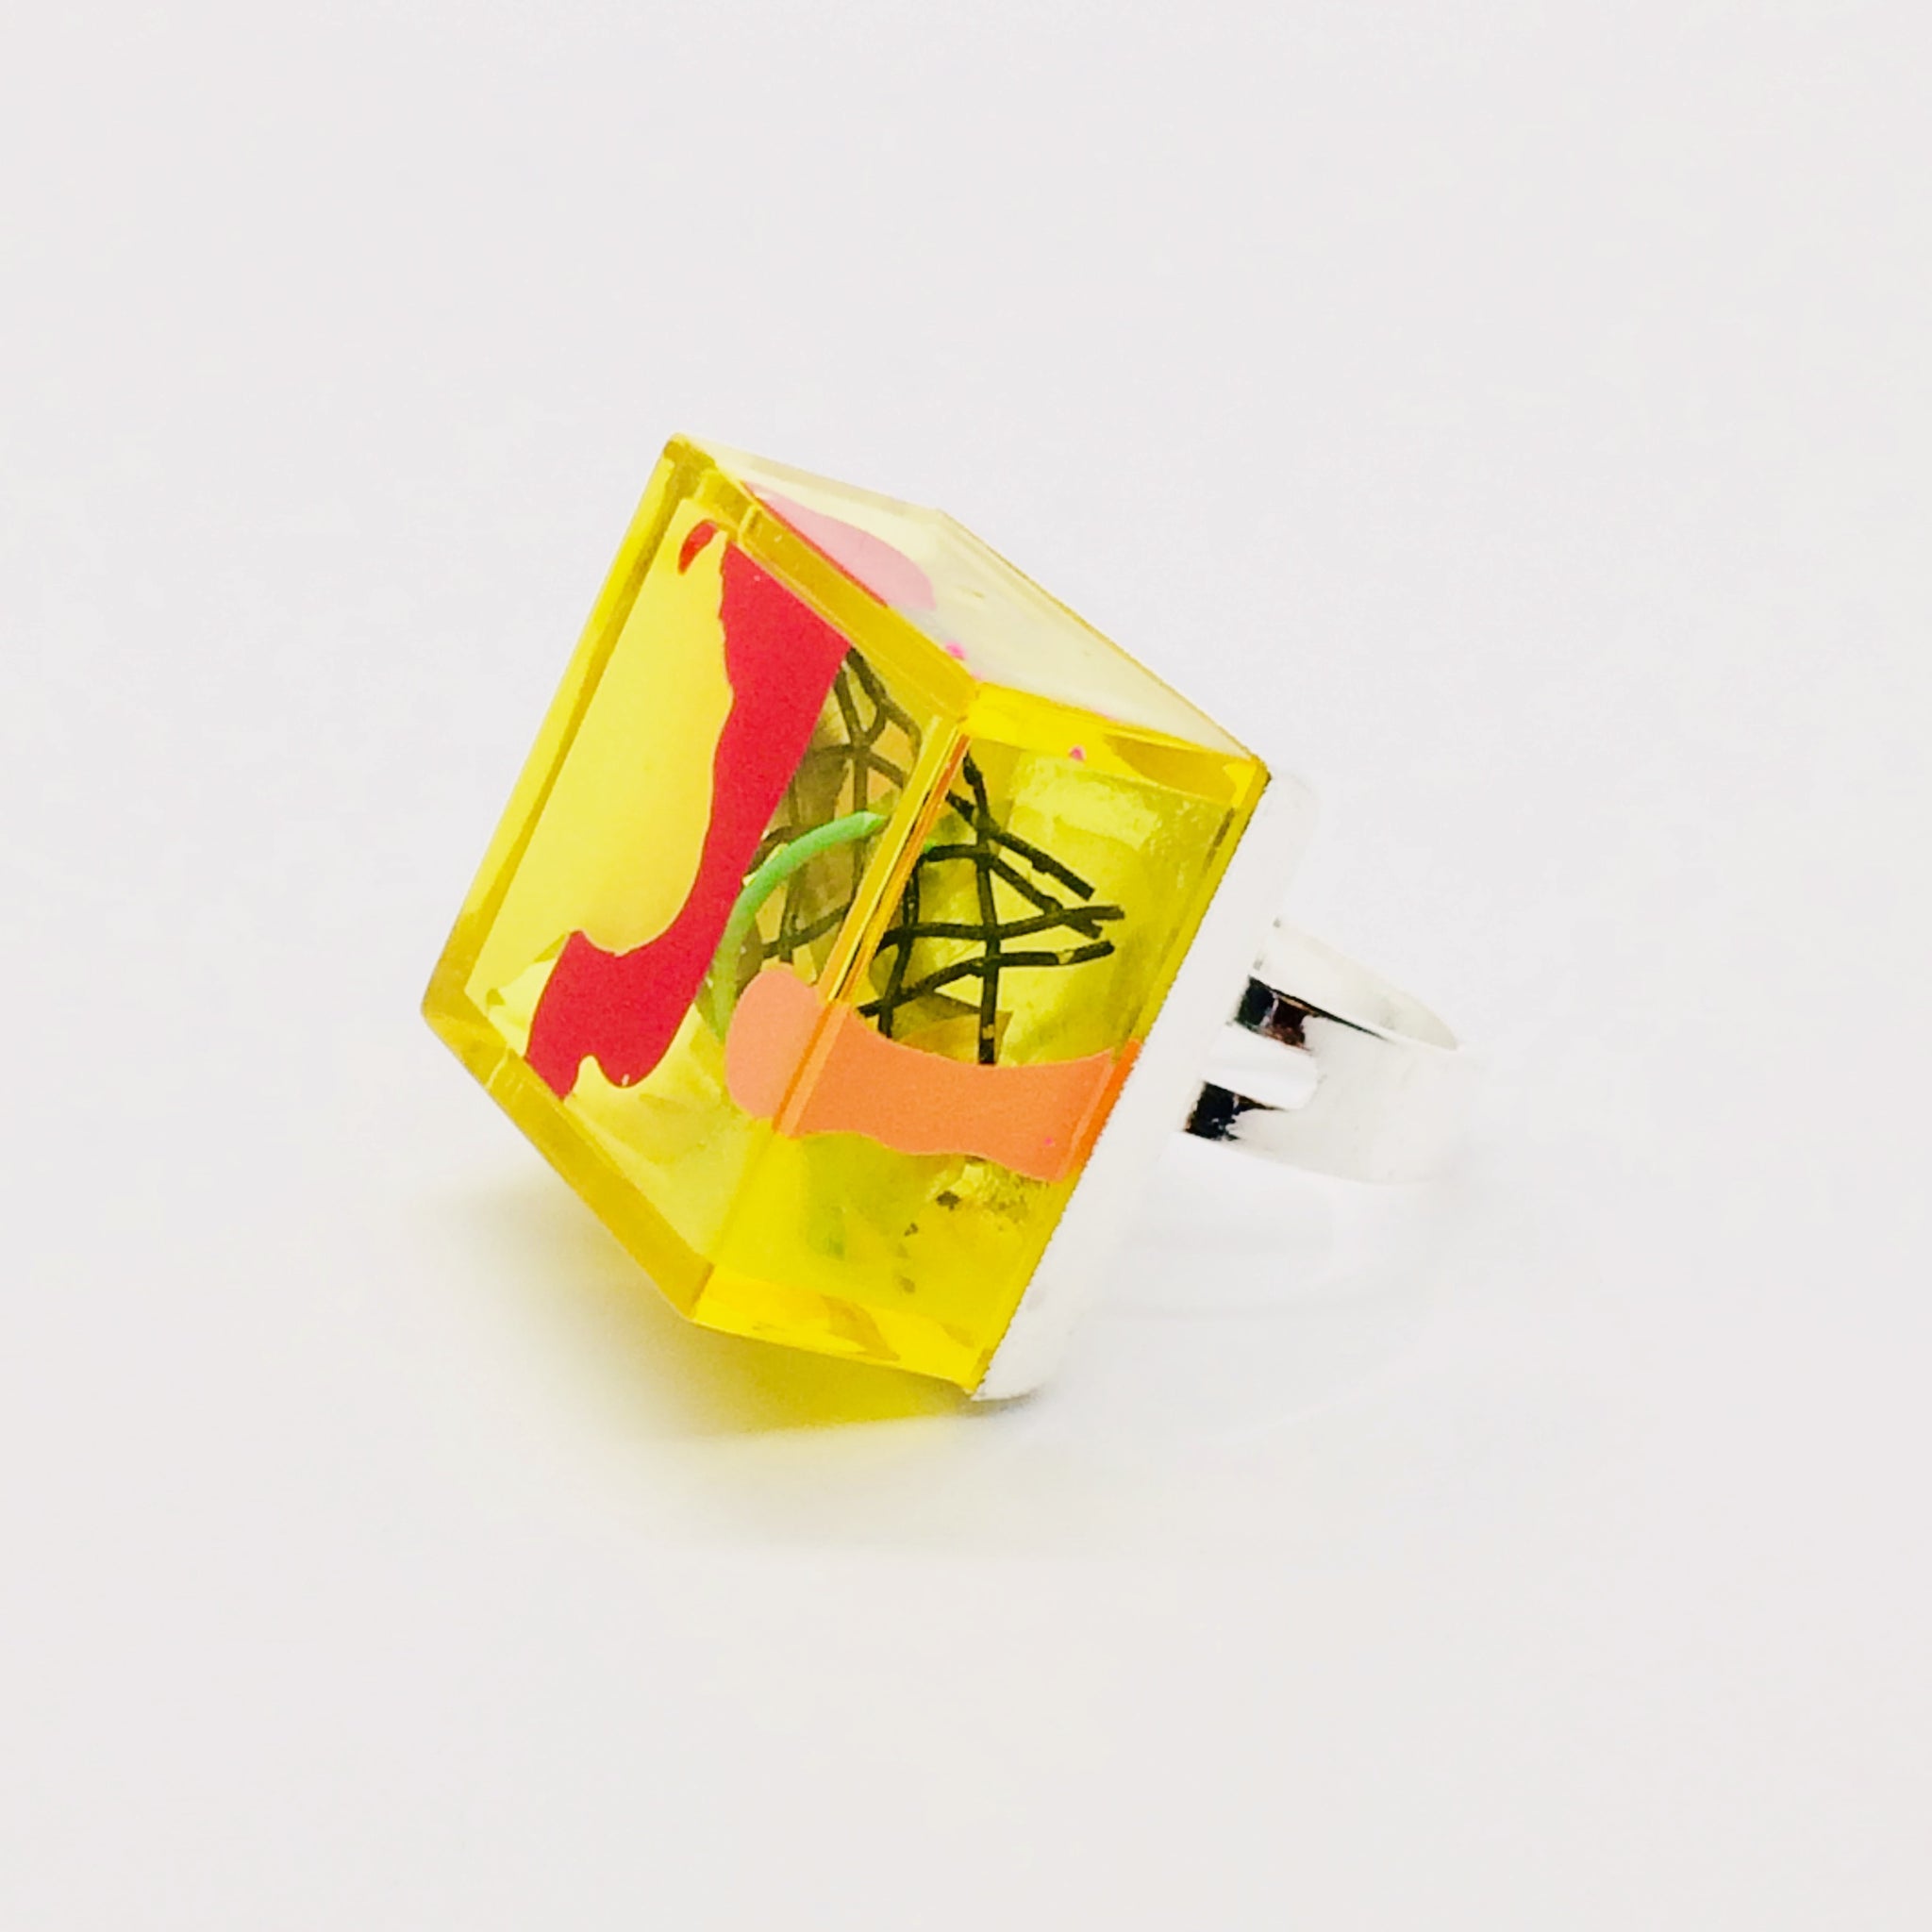 Yellow Fluorescent lightweight Plexiglas adjustable ring with red and white acrylic paint and wire mesh, hand assembled and painted for the Nodes Collection by Olga Alexander